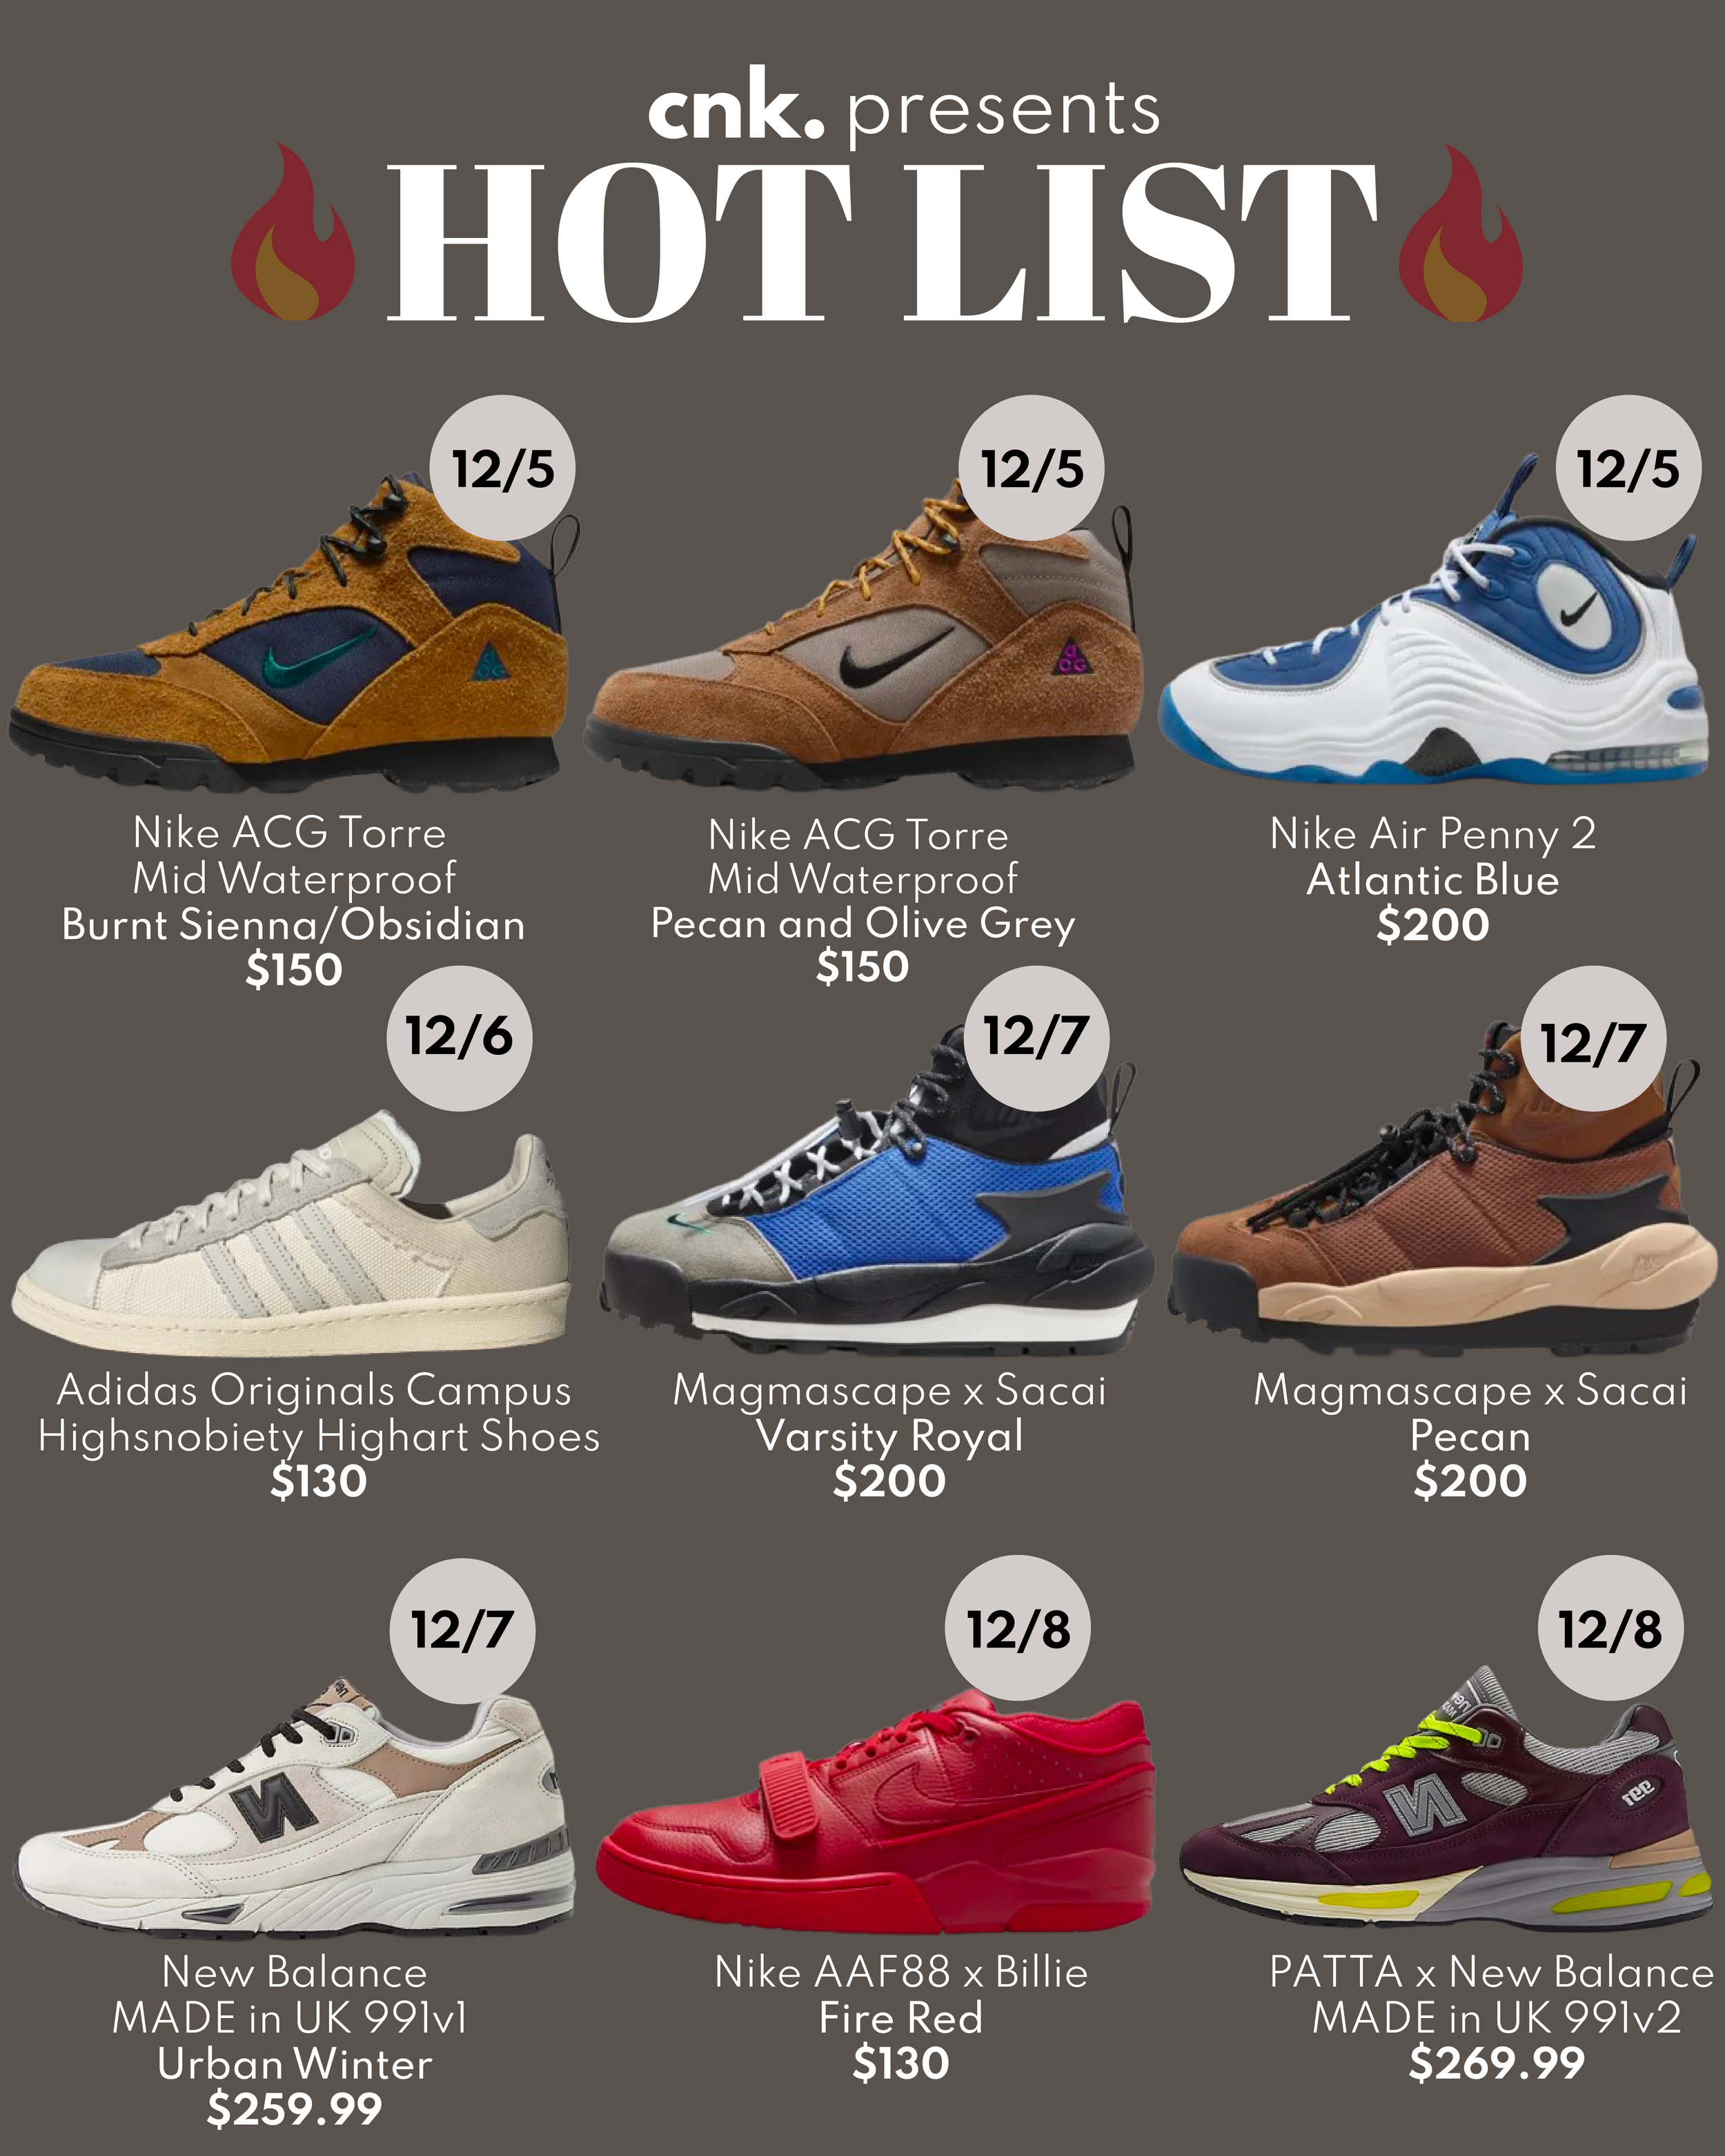 HotList12.4.1 (1).png